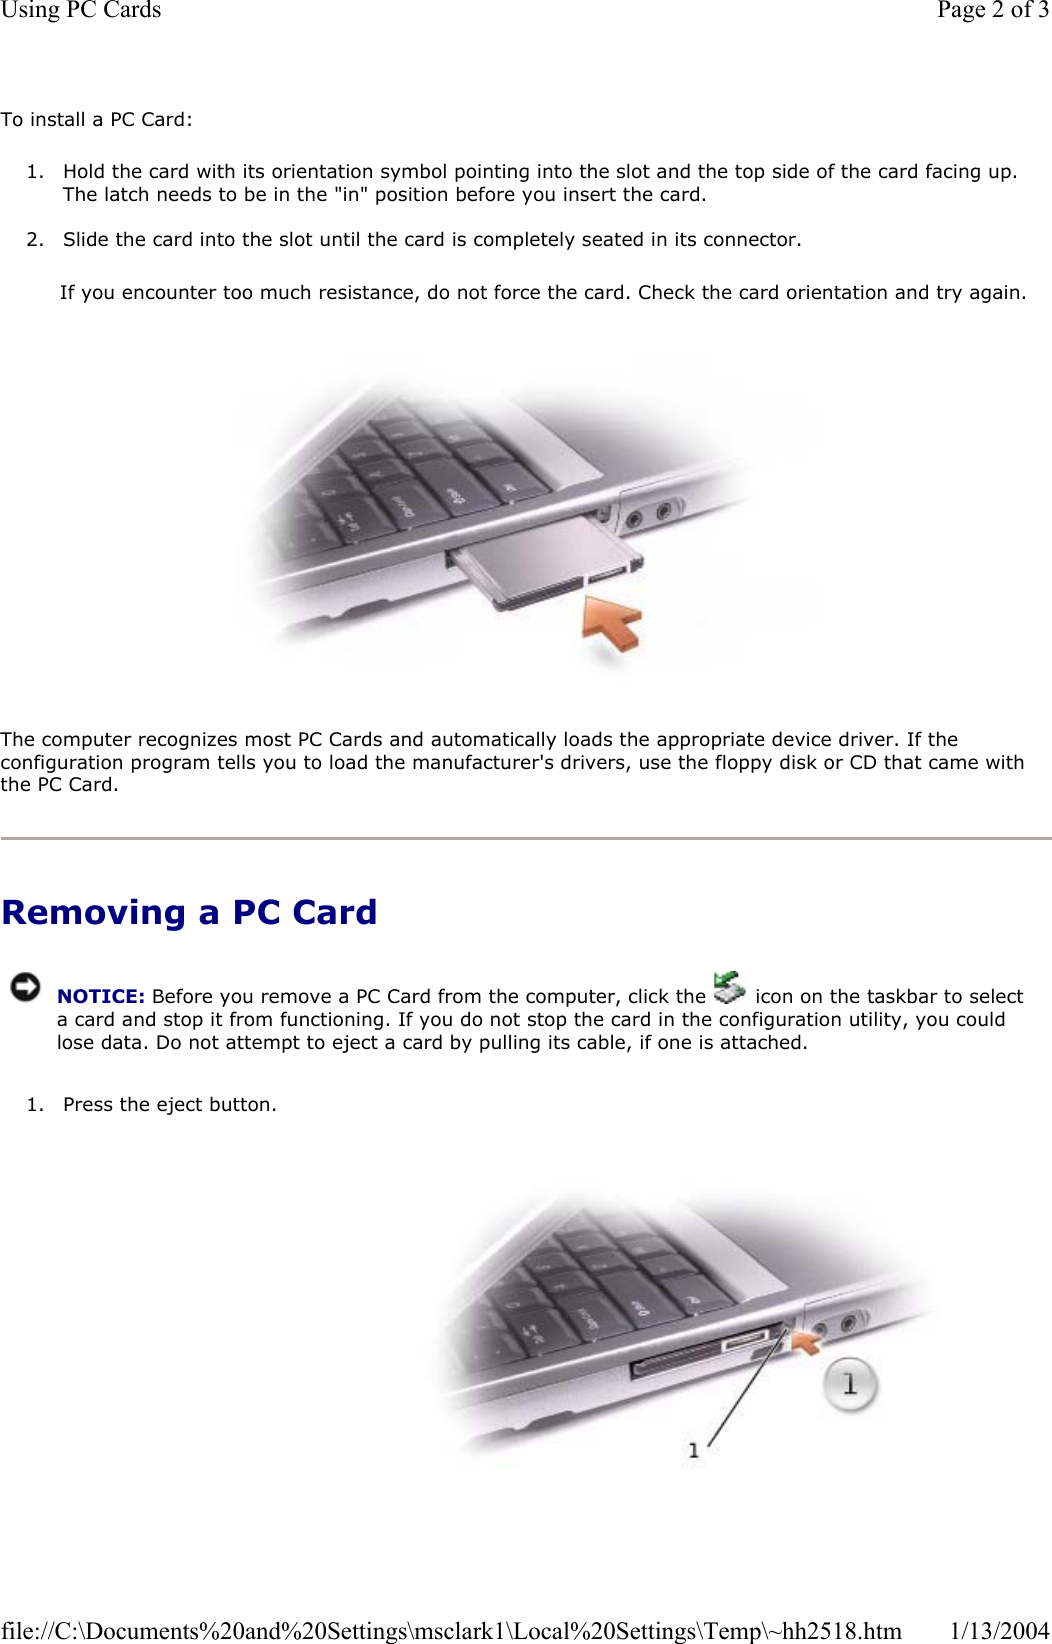 To install a PC Card: 1. Hold the card with its orientation symbol pointing into the slot and the top side of the card facing up. The latch needs to be in the &quot;in&quot; position before you insert the card. 2. Slide the card into the slot until the card is completely seated in its connector.  If you encounter too much resistance, do not force the card. Check the card orientation and try again.  The computer recognizes most PC Cards and automatically loads the appropriate device driver. If the configuration program tells you to load the manufacturer&apos;s drivers, use the floppy disk or CD that came with the PC Card. Removing a PC Card1. Press the eject button. NOTICE: Before you remove a PC Card from the computer, click the   icon on the taskbar to select a card and stop it from functioning. If you do not stop the card in the configuration utility, you could lose data. Do not attempt to eject a card by pulling its cable, if one is attached.Page 2 of 3Using PC Cards1/13/2004file://C:\Documents%20and%20Settings\msclark1\Local%20Settings\Temp\~hh2518.htm